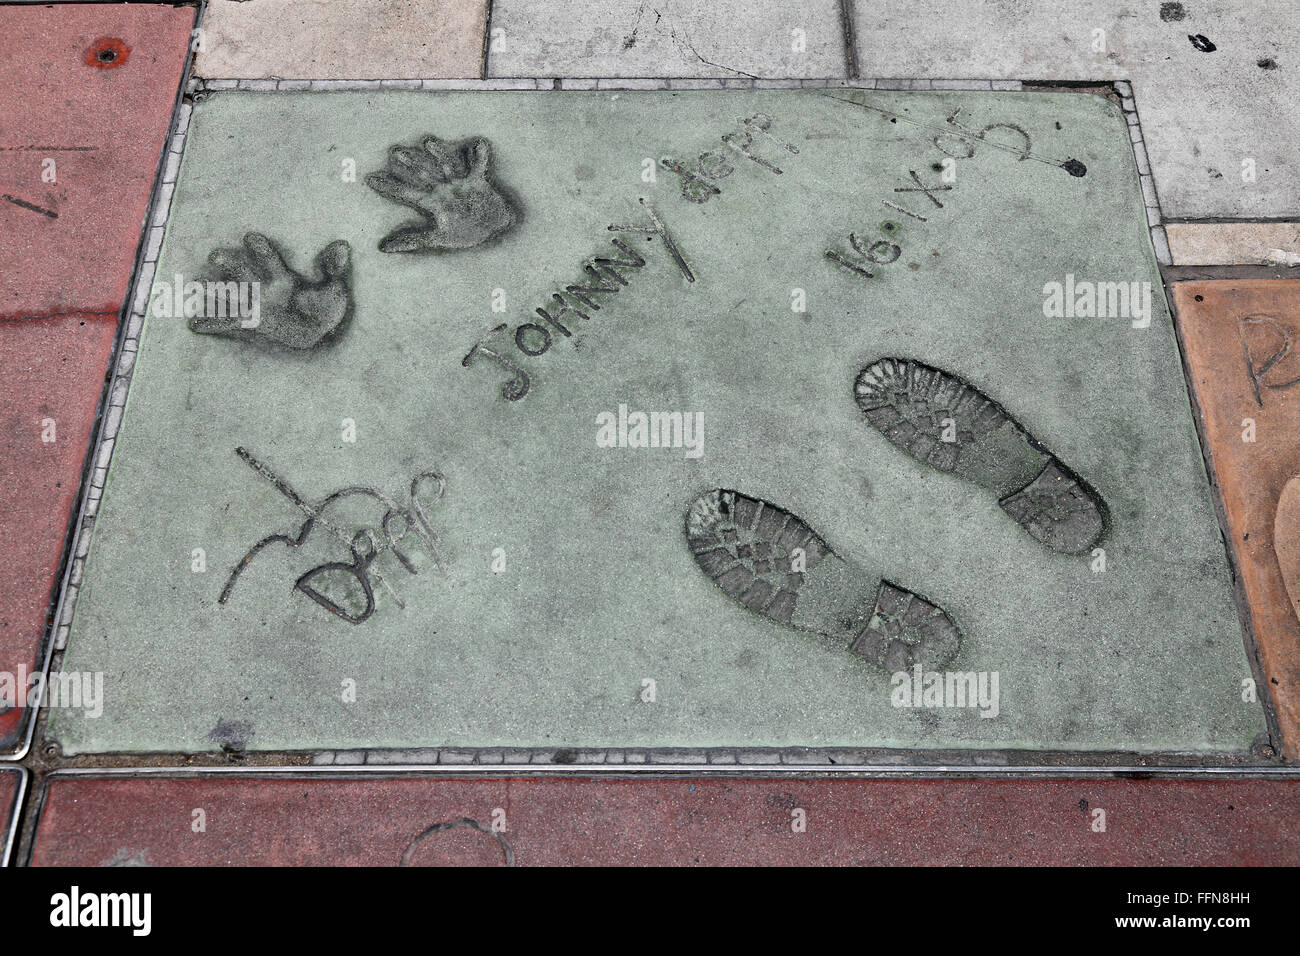 Depp, Johnny, * 9.6.1963, American actor, Hand- and footprints, Grauman's Chinese Theater, Hollywood Blvd, Hollywood, Los Angeles, California, USA, Stock Photo